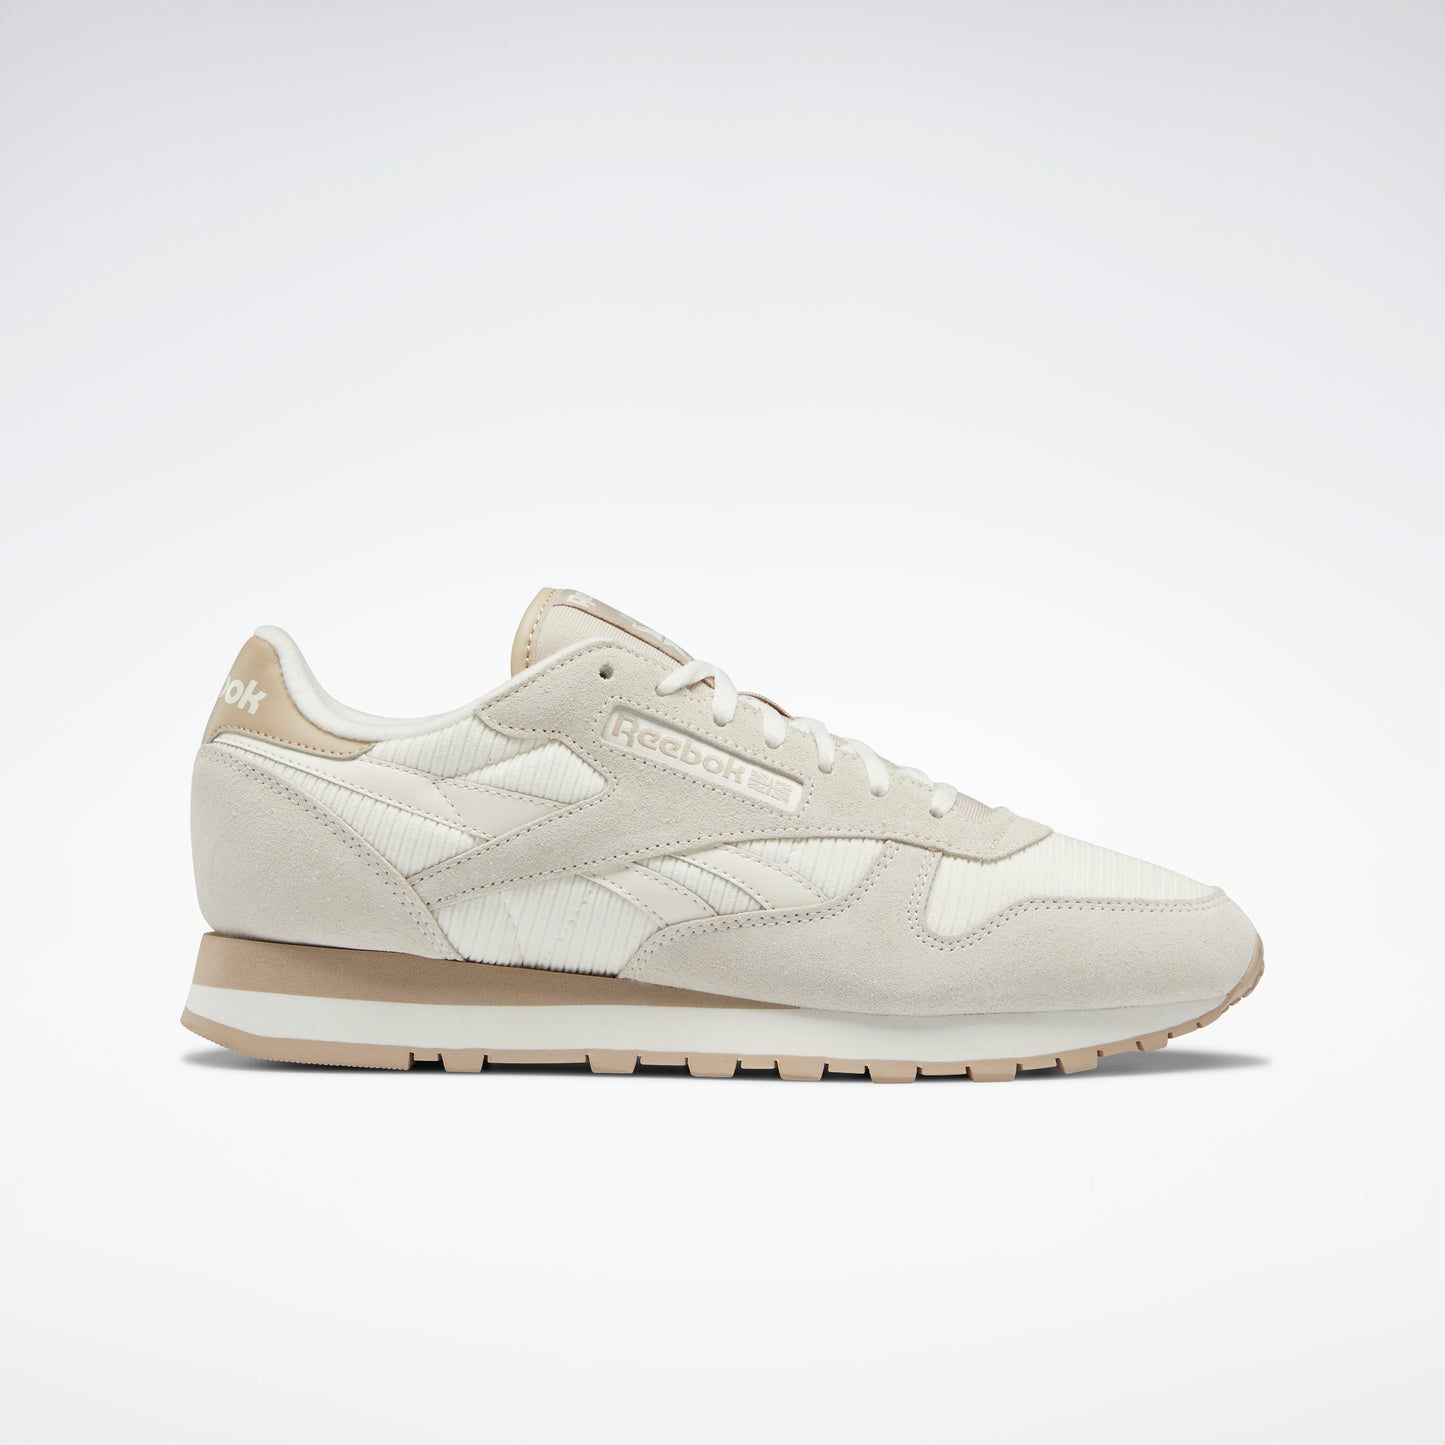 Men's sneakers and shoes Reebok Classic Leather Ftw White/ Core Black/  Radiant Aqua